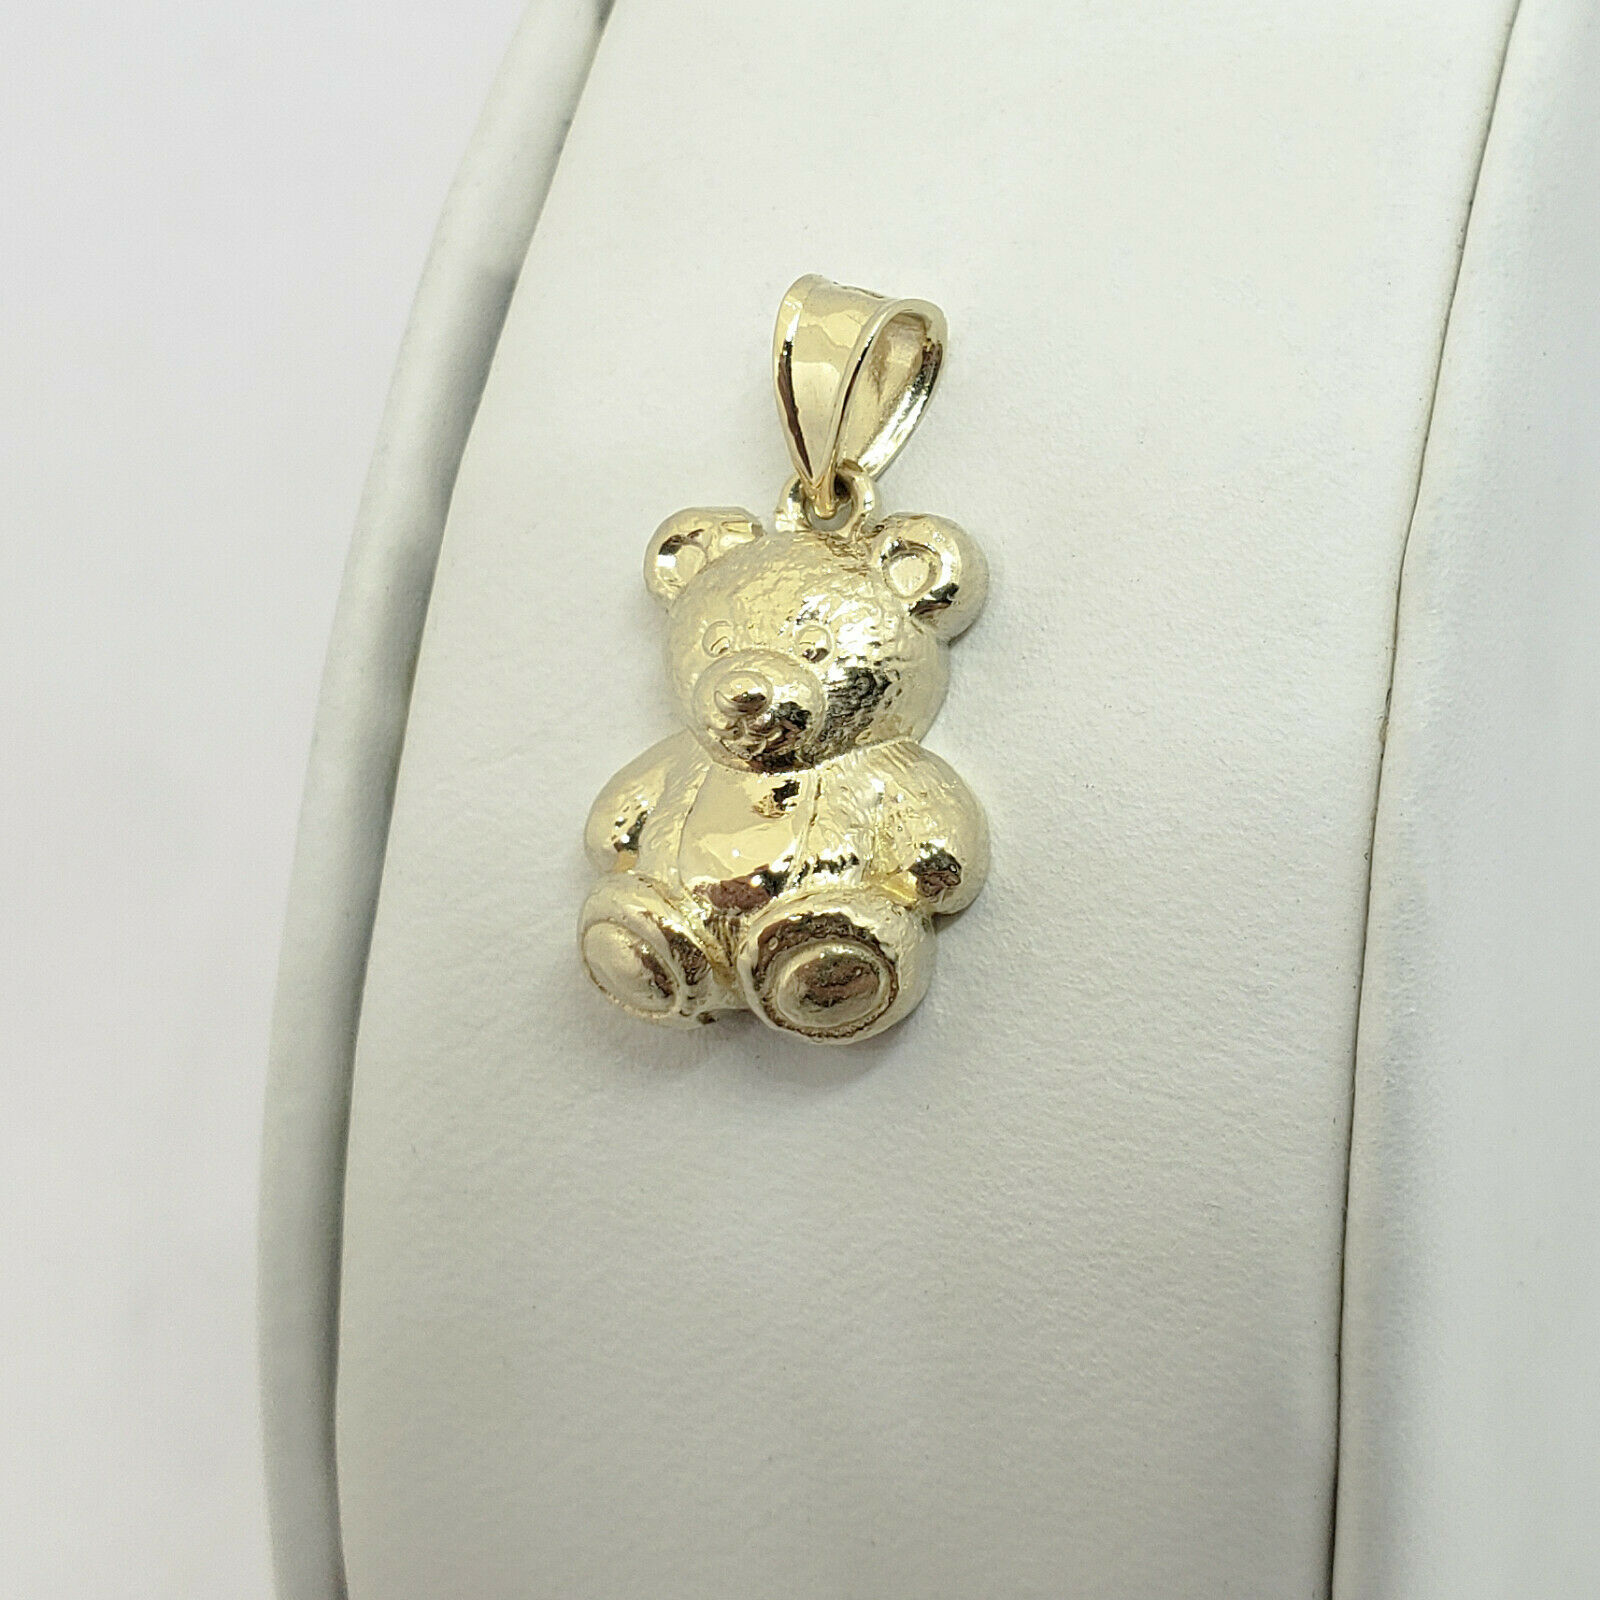 2.7 grams Small Details about   Solid 10K Yellow Gold Teddy Bear Pendant Charm